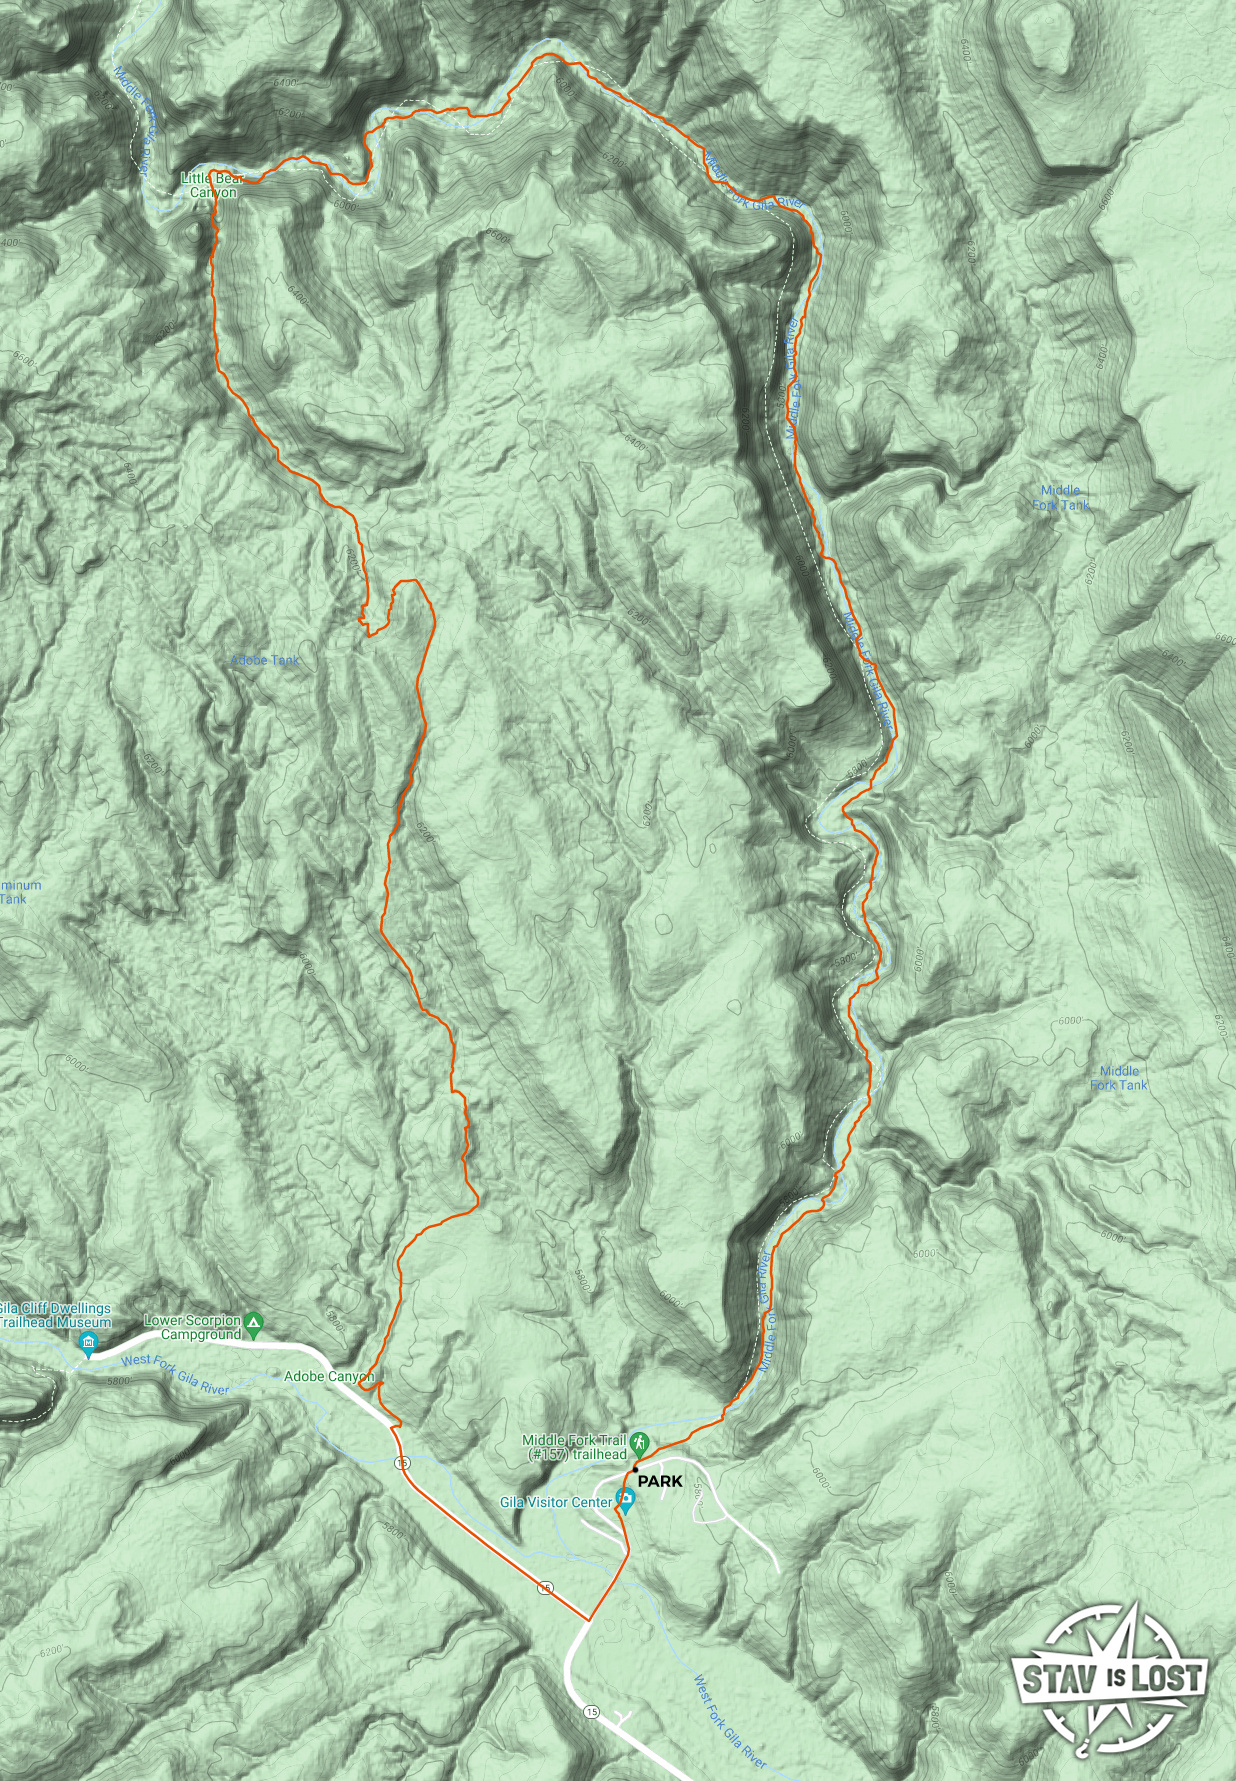 map for Middle Fork of Gila River and Little Bear Canyon Loop by stav is lost